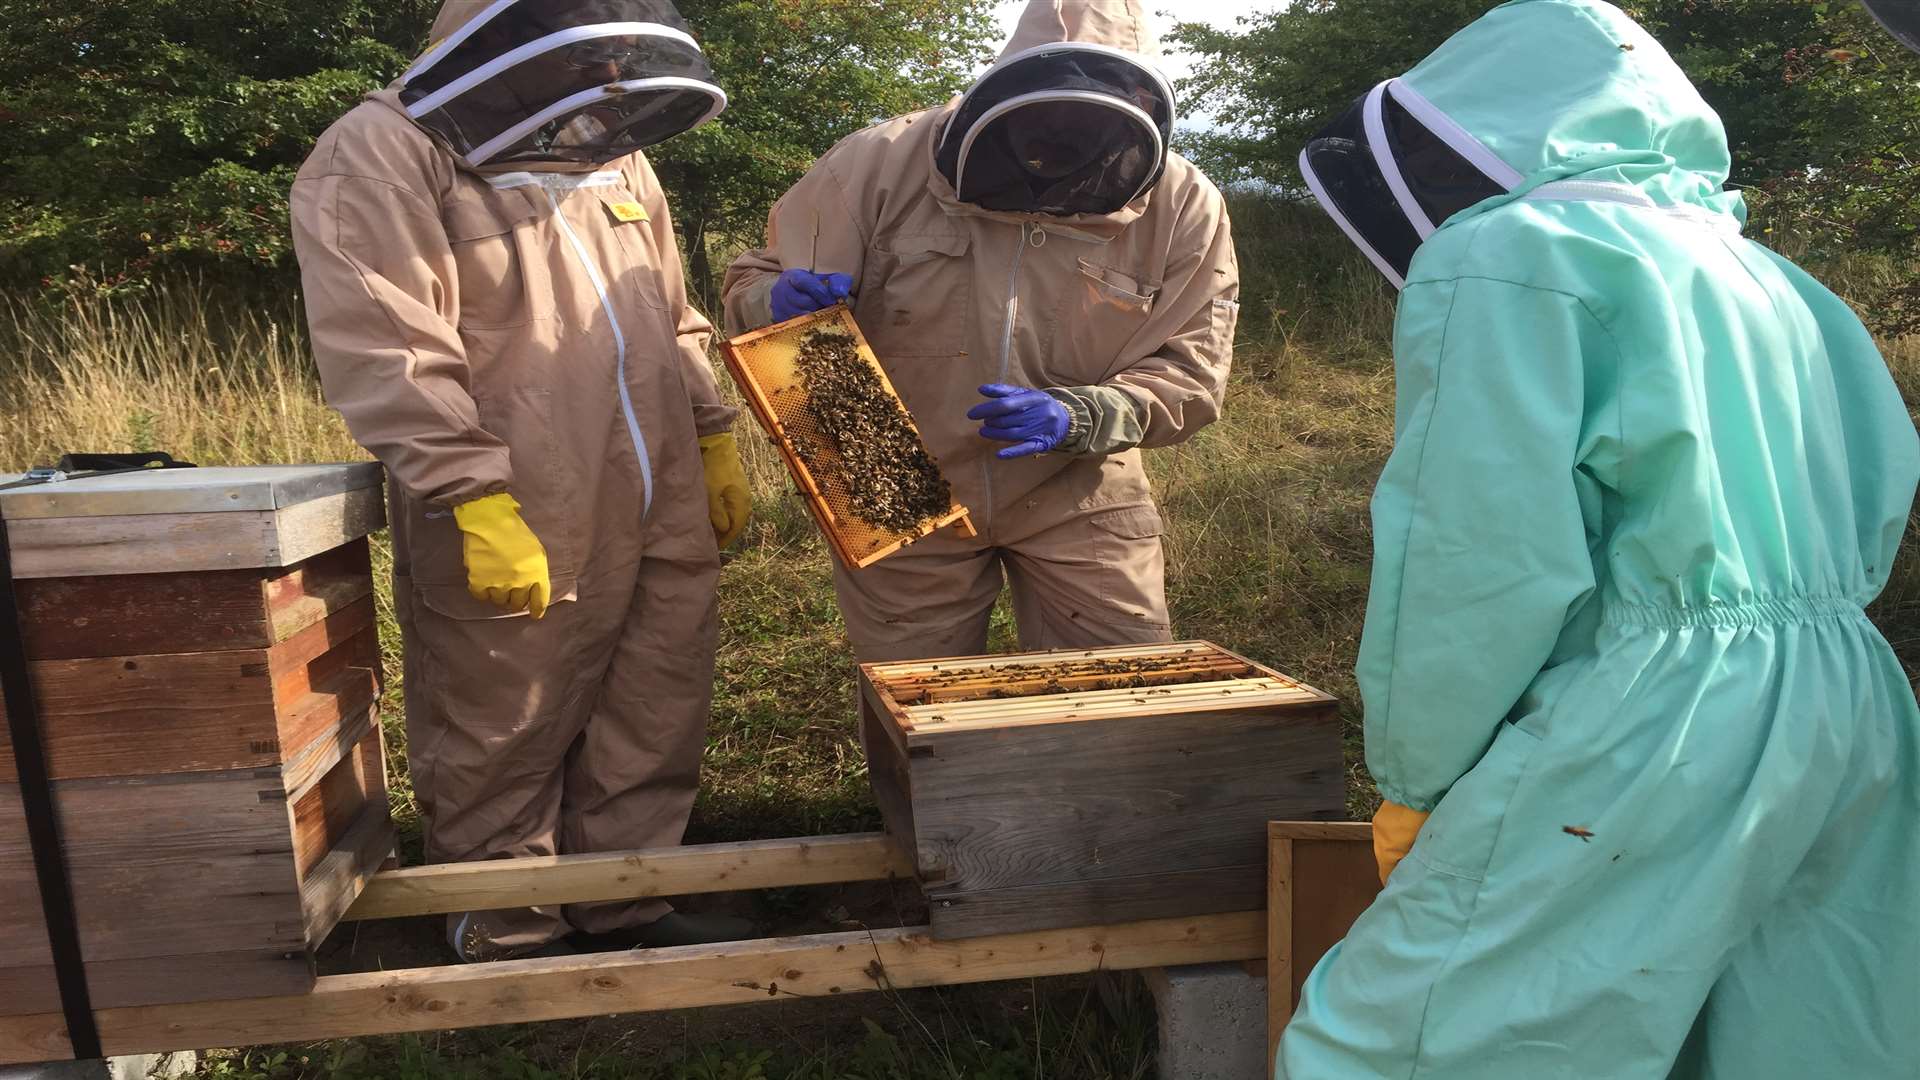 Members of the Honey Club tending to the hives along the HS1 track